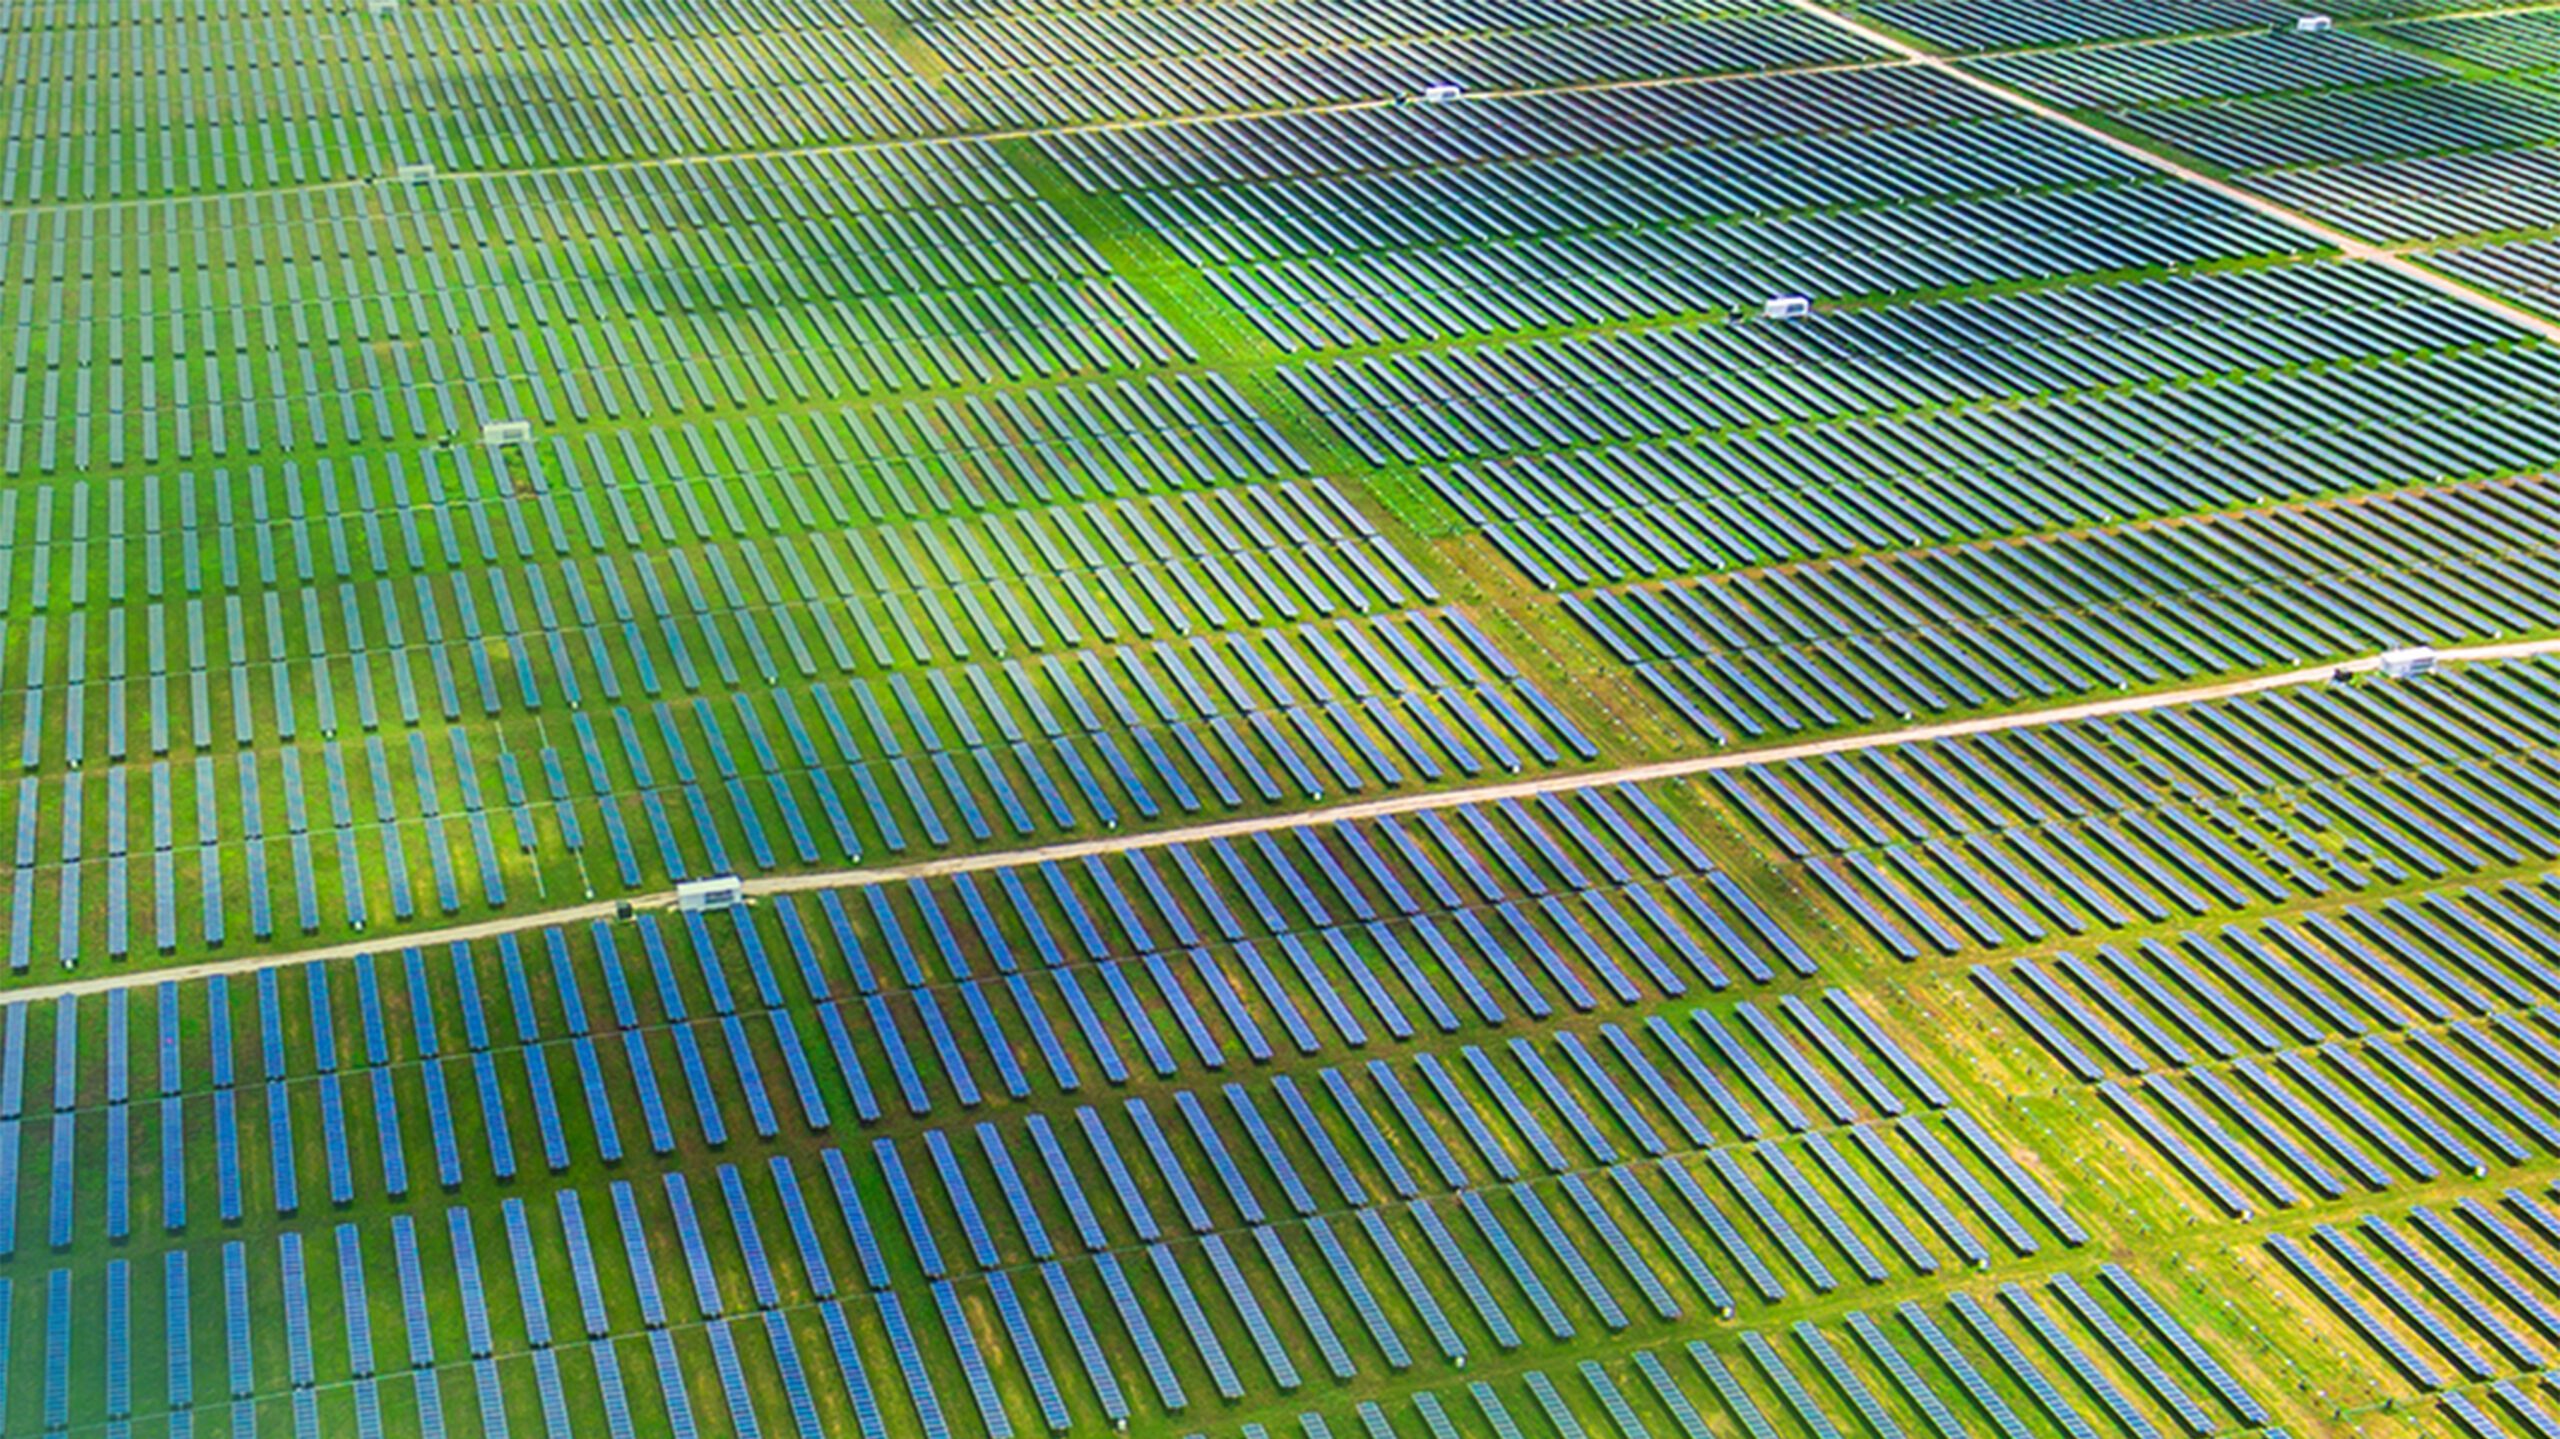 Aerial view of solar cell field.